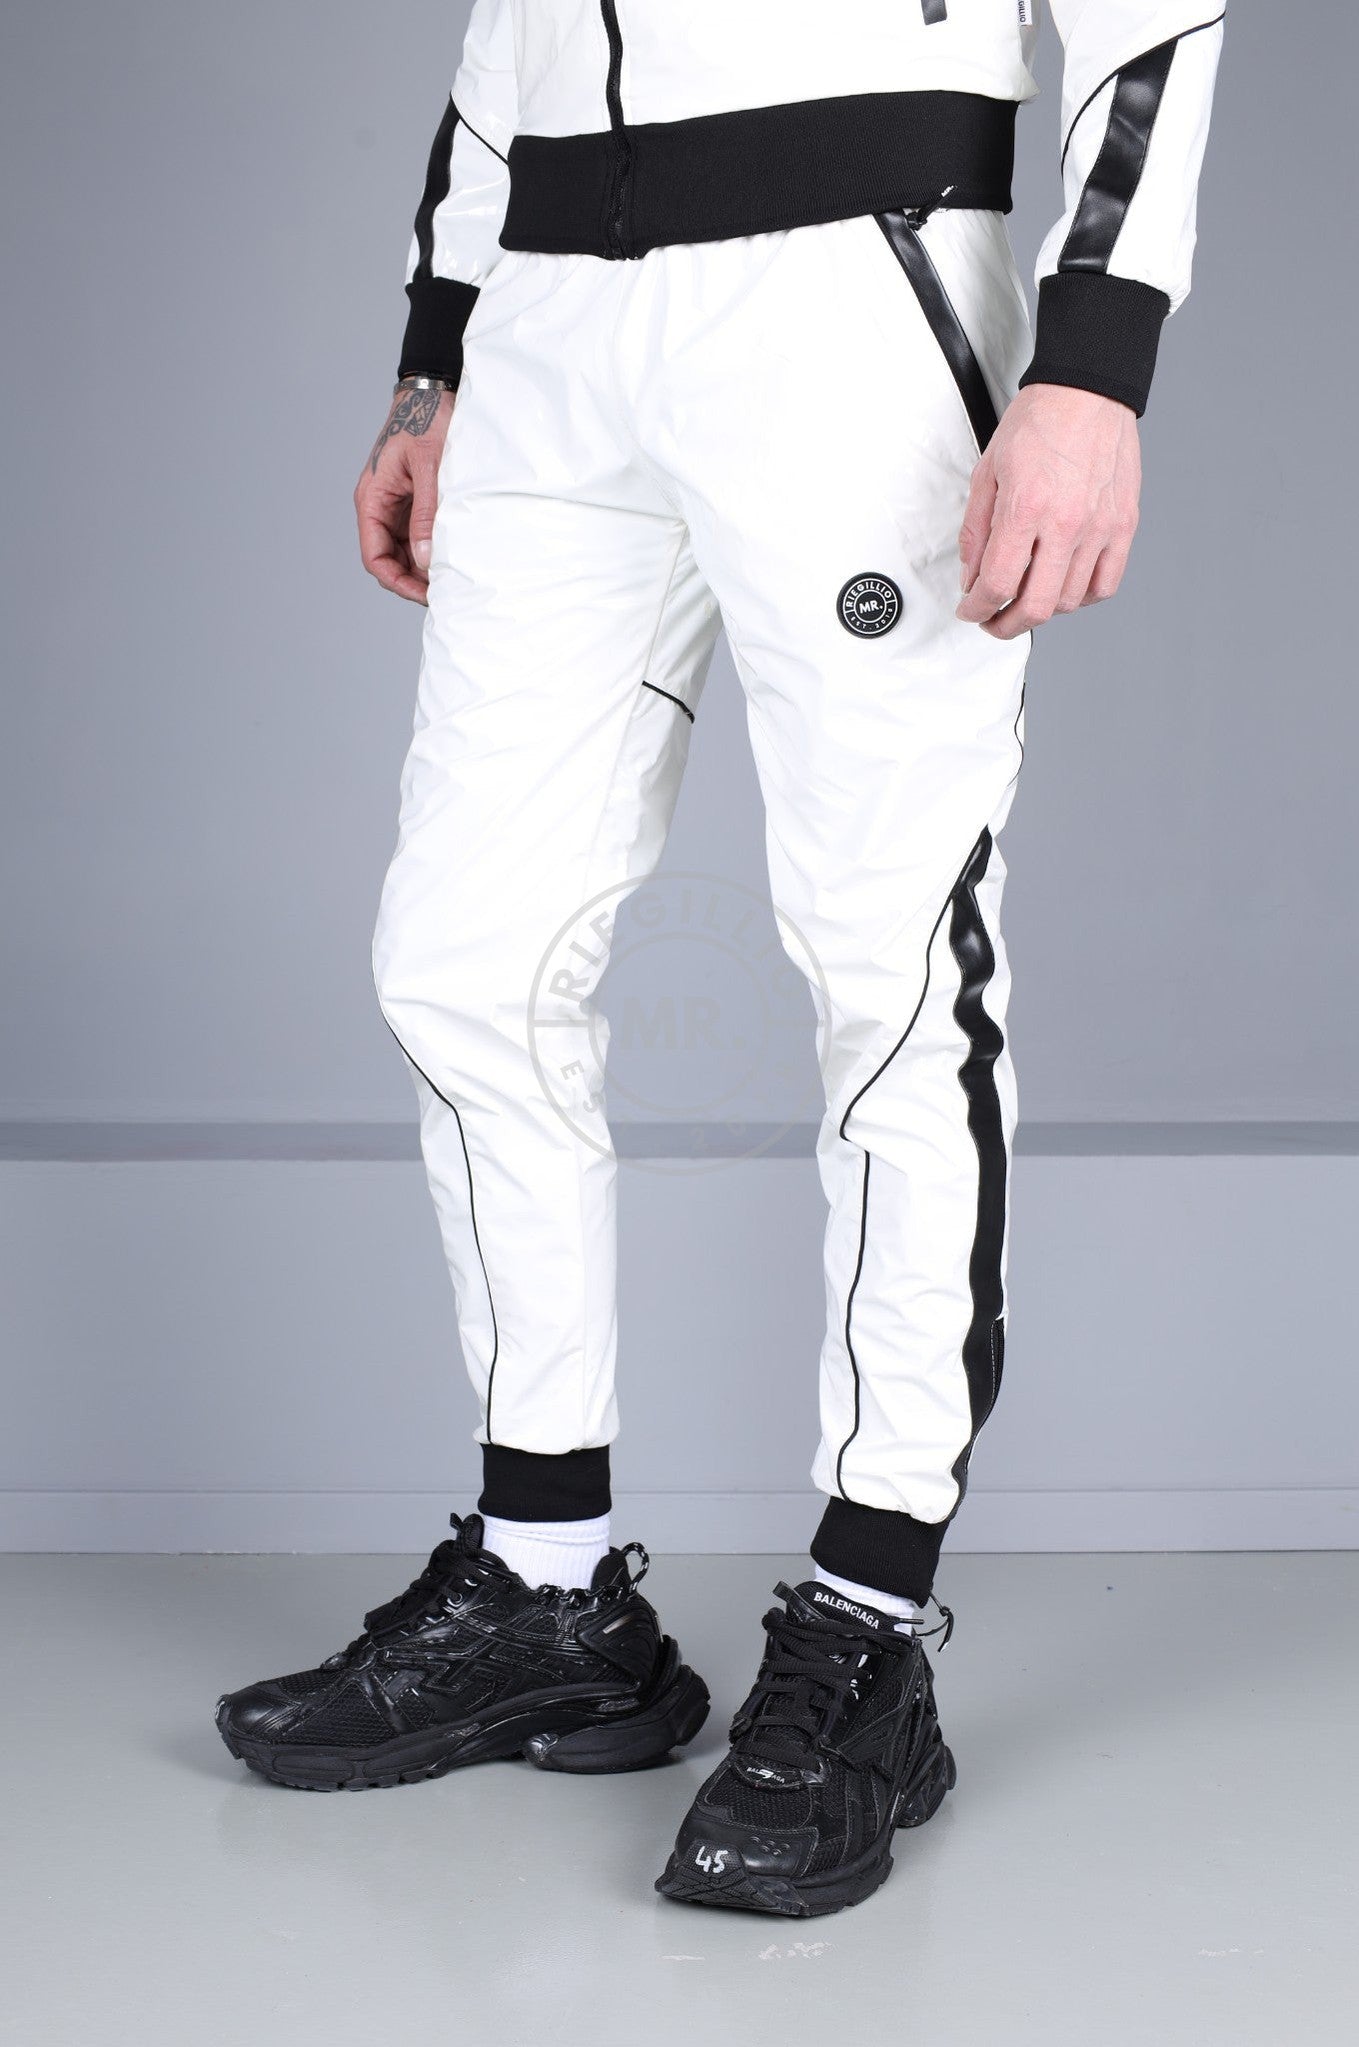 PVC 24 Tracksuit Pants - White with Black Piping at MR. Riegillio